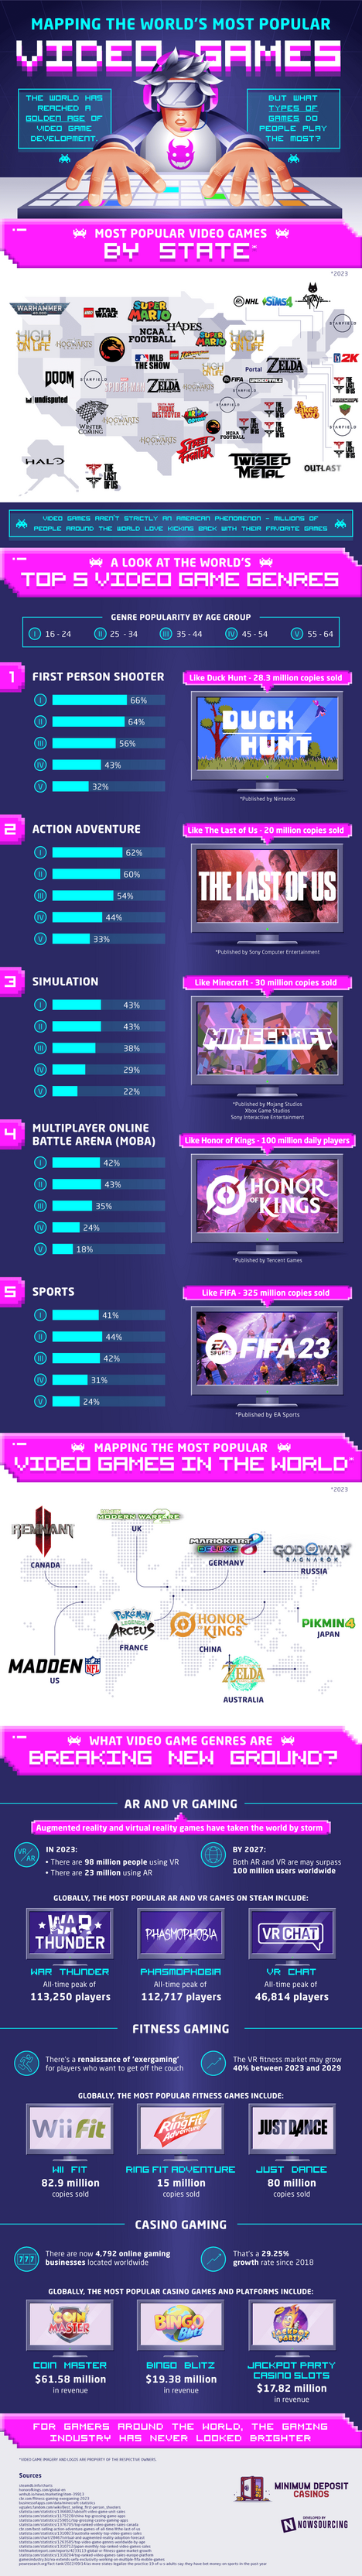 The World’s Most Popular Video Games